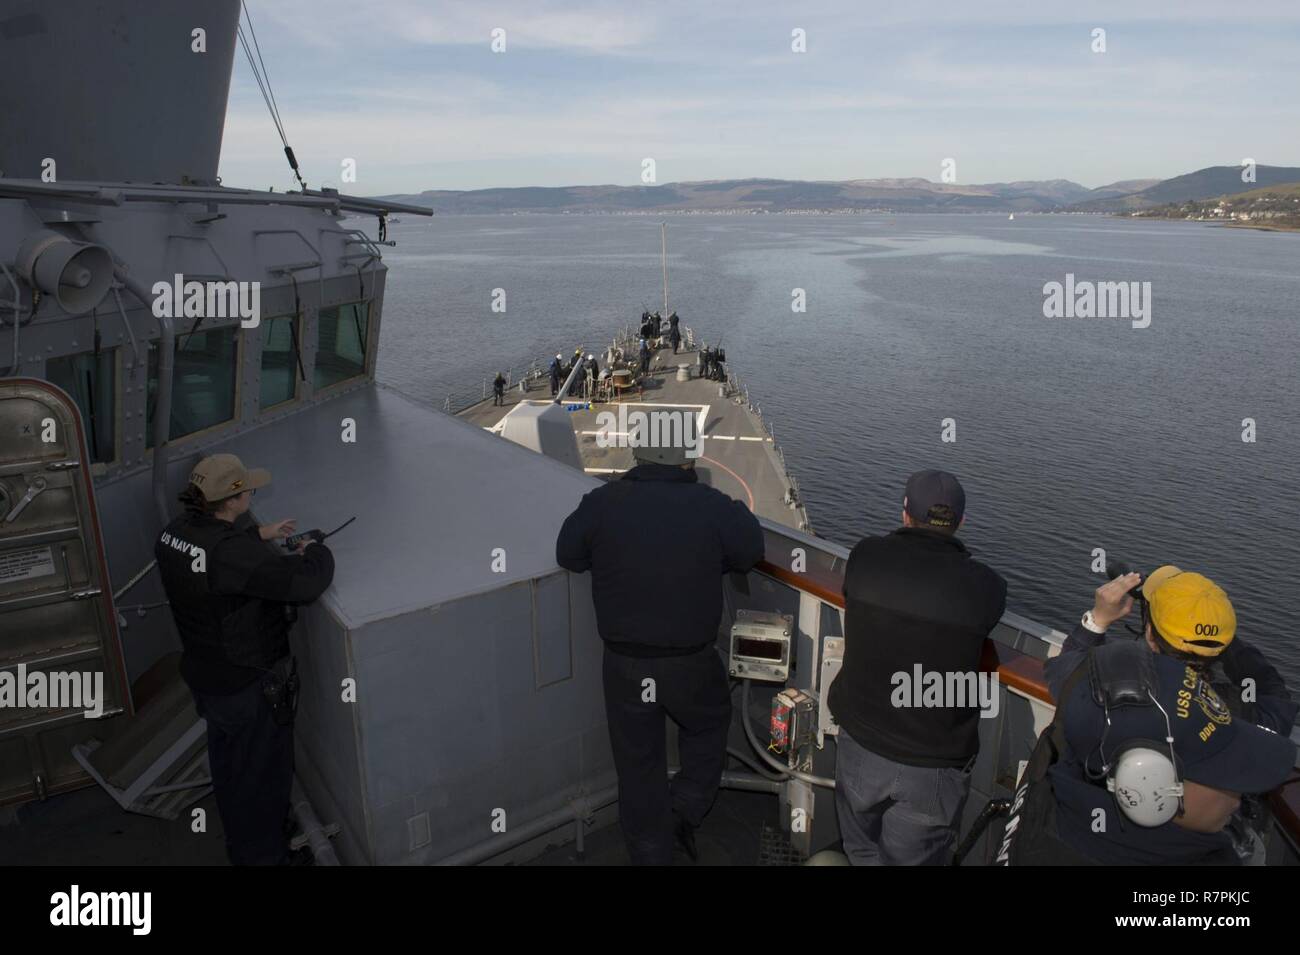 FASLANE, Scotland (March 26, 2017)  Sailors aboard the guided-missile destroyer USS Carney (DDG 64) stand watch on the bridge wing while departing Faslane, Scotland.  Carney is forward-deployed to Rota, Spain, and is conducting its third patrol in the U.S. 6th Fleet area of operations in support of U.S. national security interests in Europe. Stock Photo